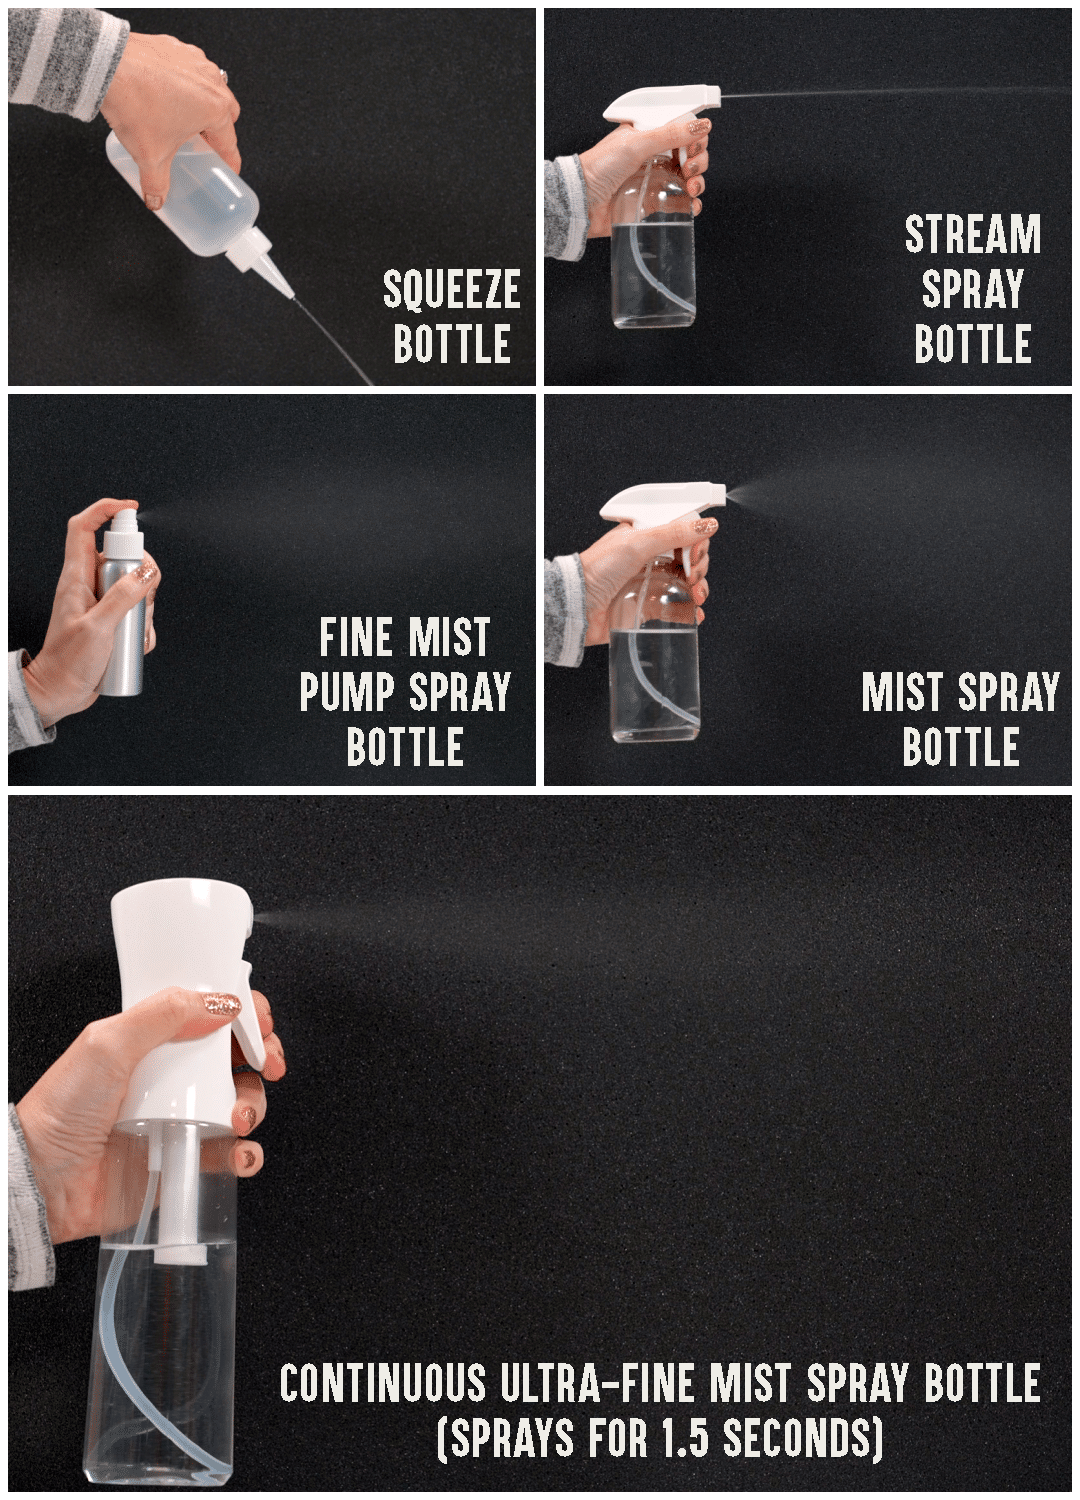 spray bottle types for bleach tie dying examples